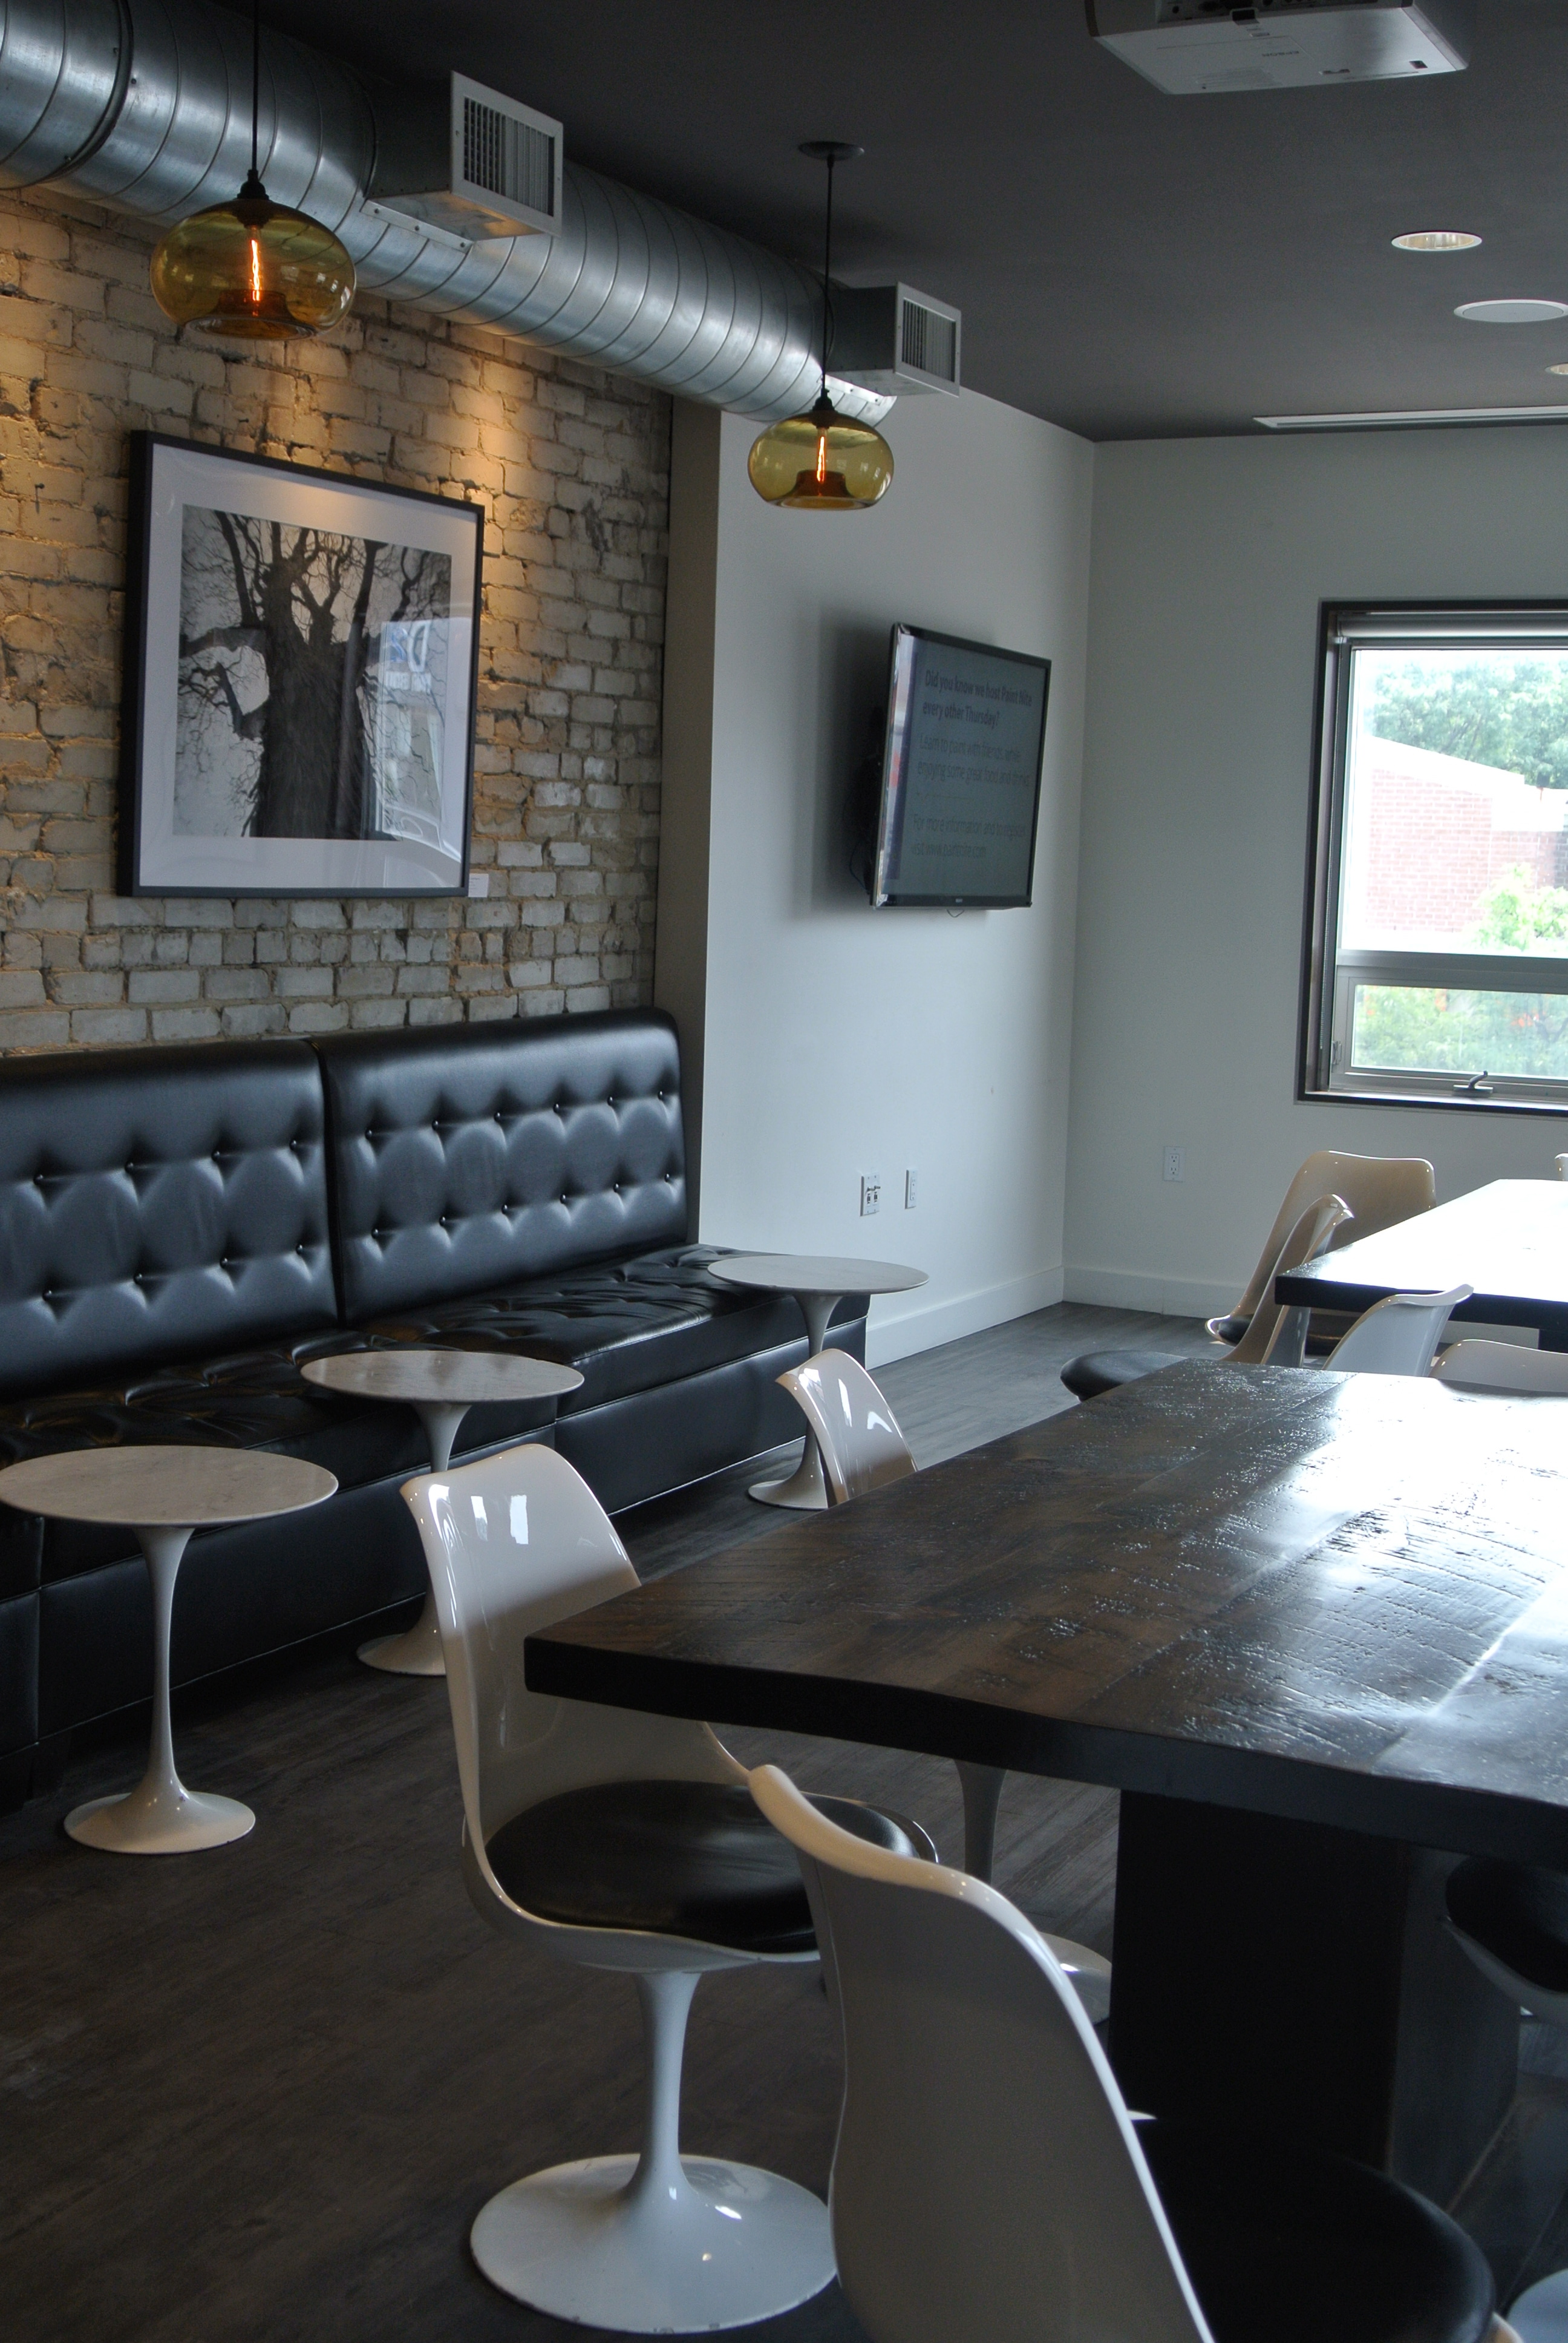 The 2nd floor seating space of the cafe.